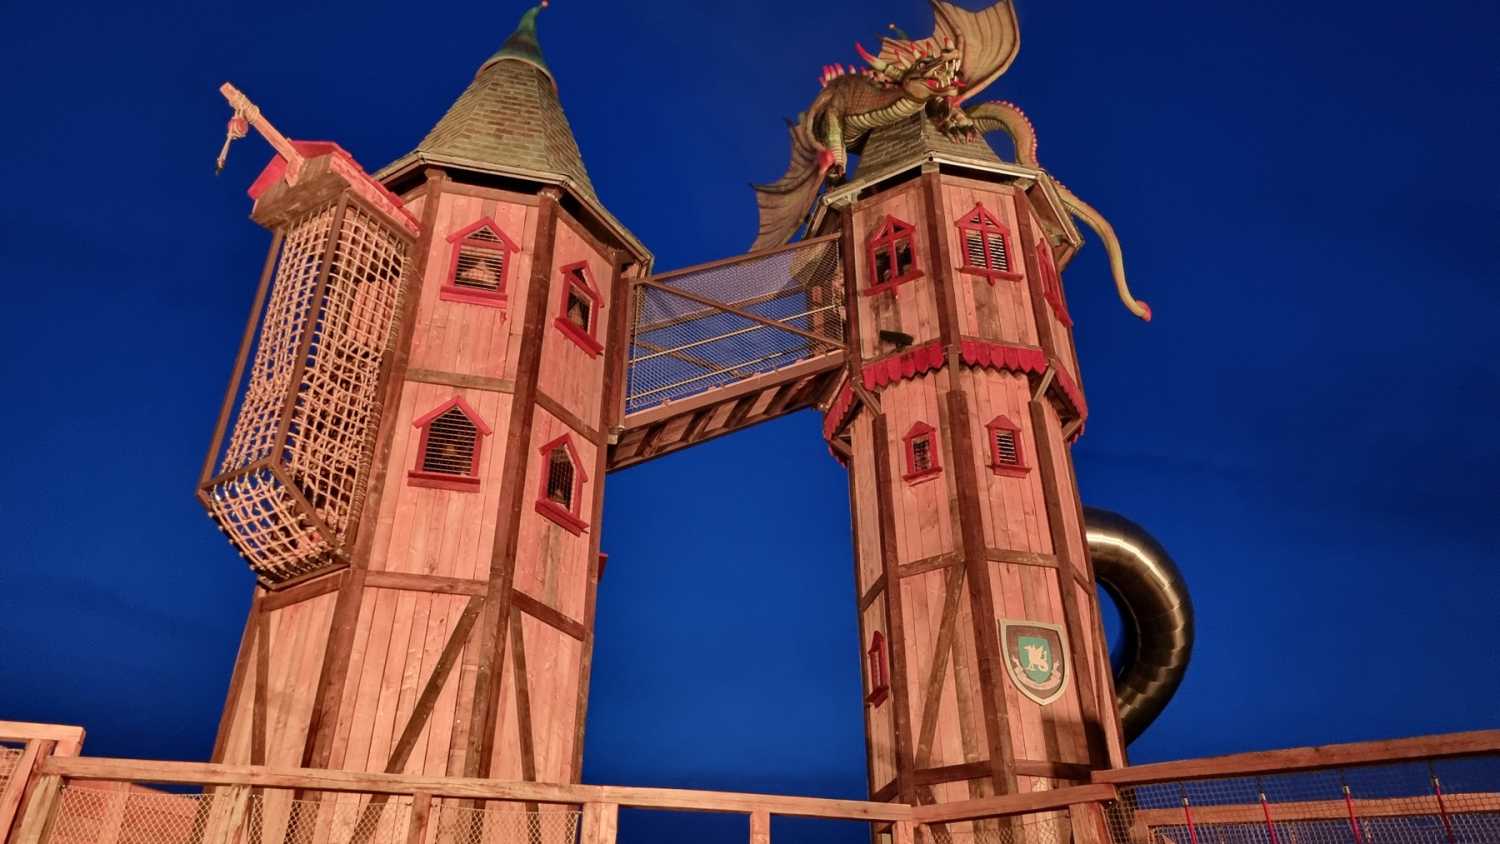 The largest play castle in the Netherlands